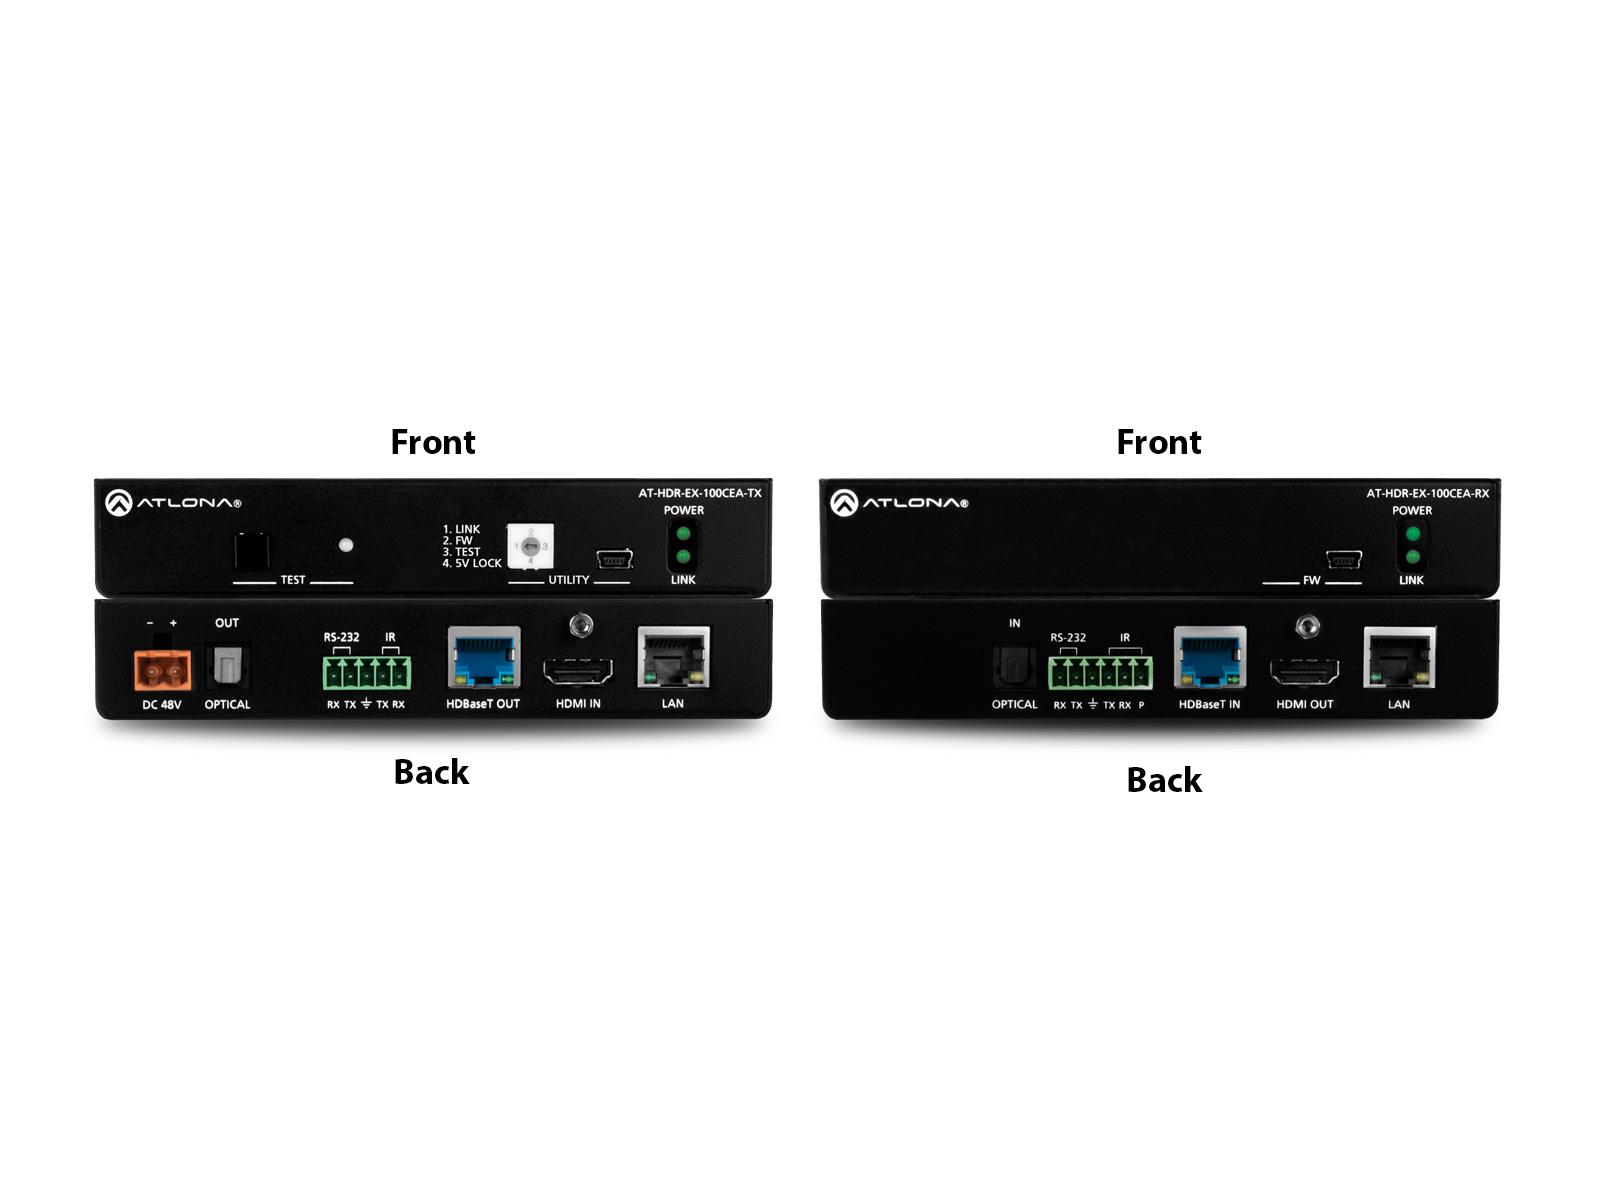 AT-HDR-EX-100CEA-KIT 4K HDR HDMI/HDBaseT Extender (Transmitter/Receiver) Set with IR/RS-232/Ethernet/PoE by Atlona